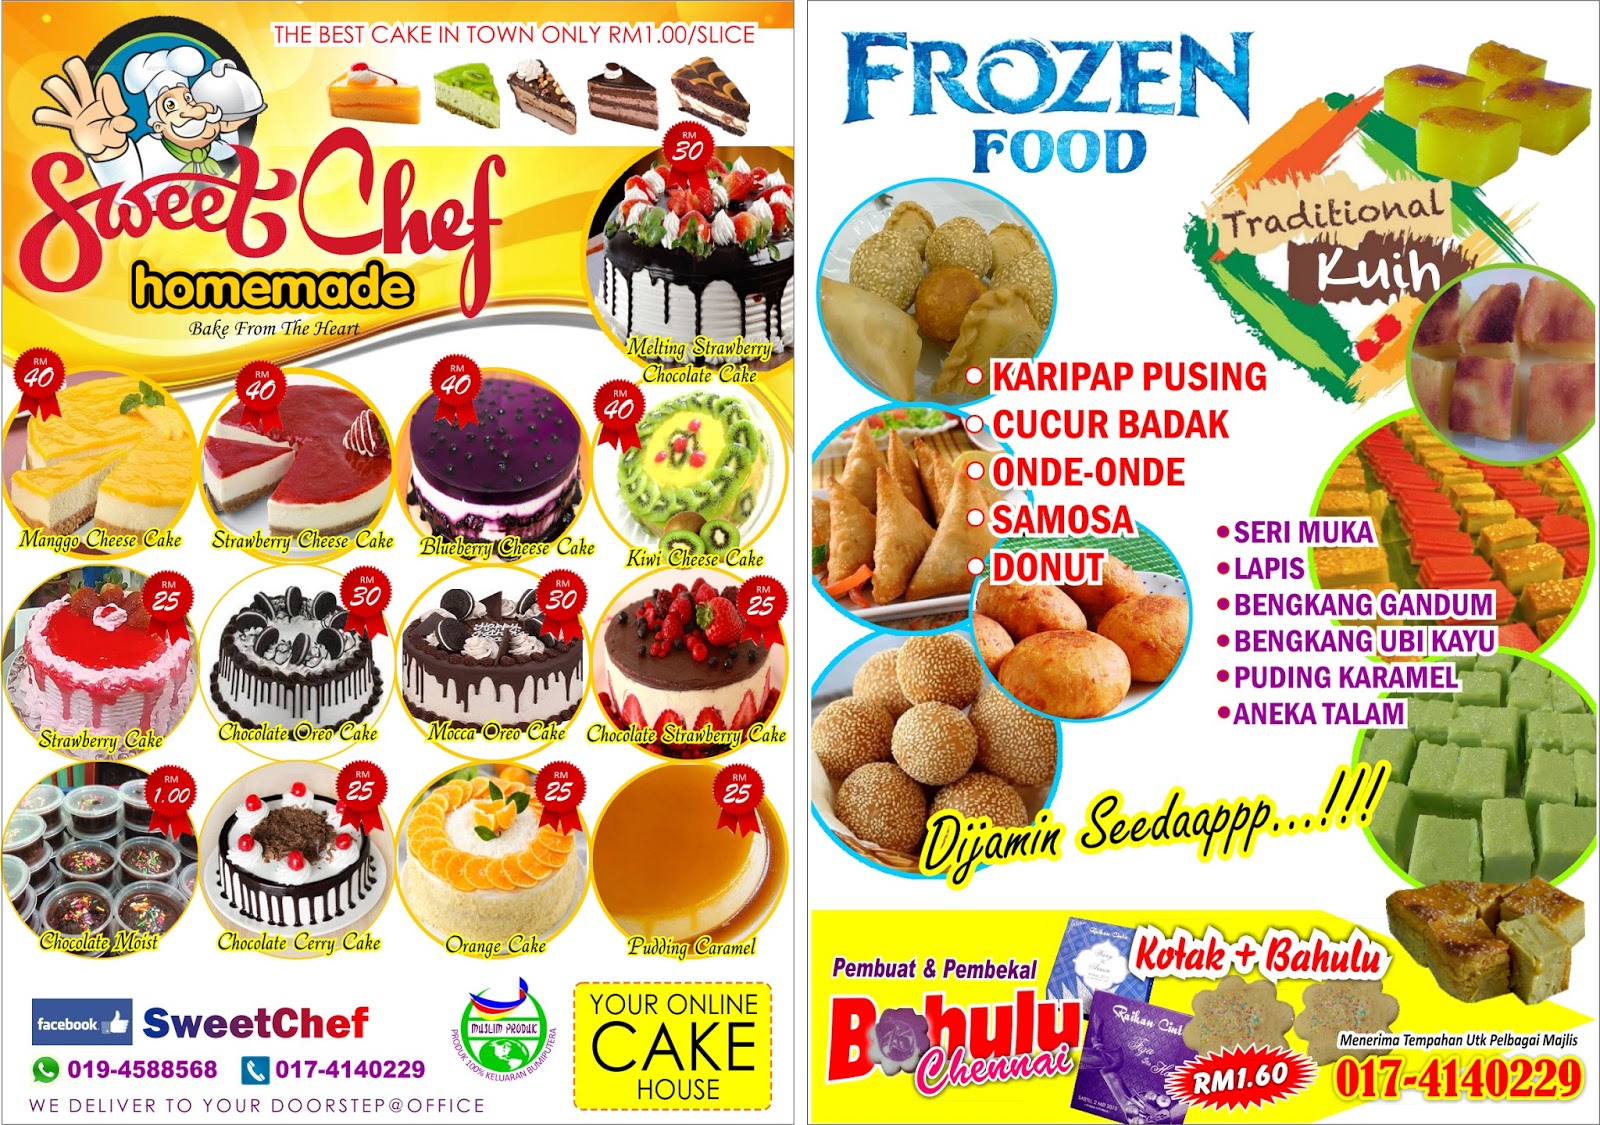 BUDGET GRAPHIC: CAKE, FROZEN FOOD & TRADITIONAL KUIH